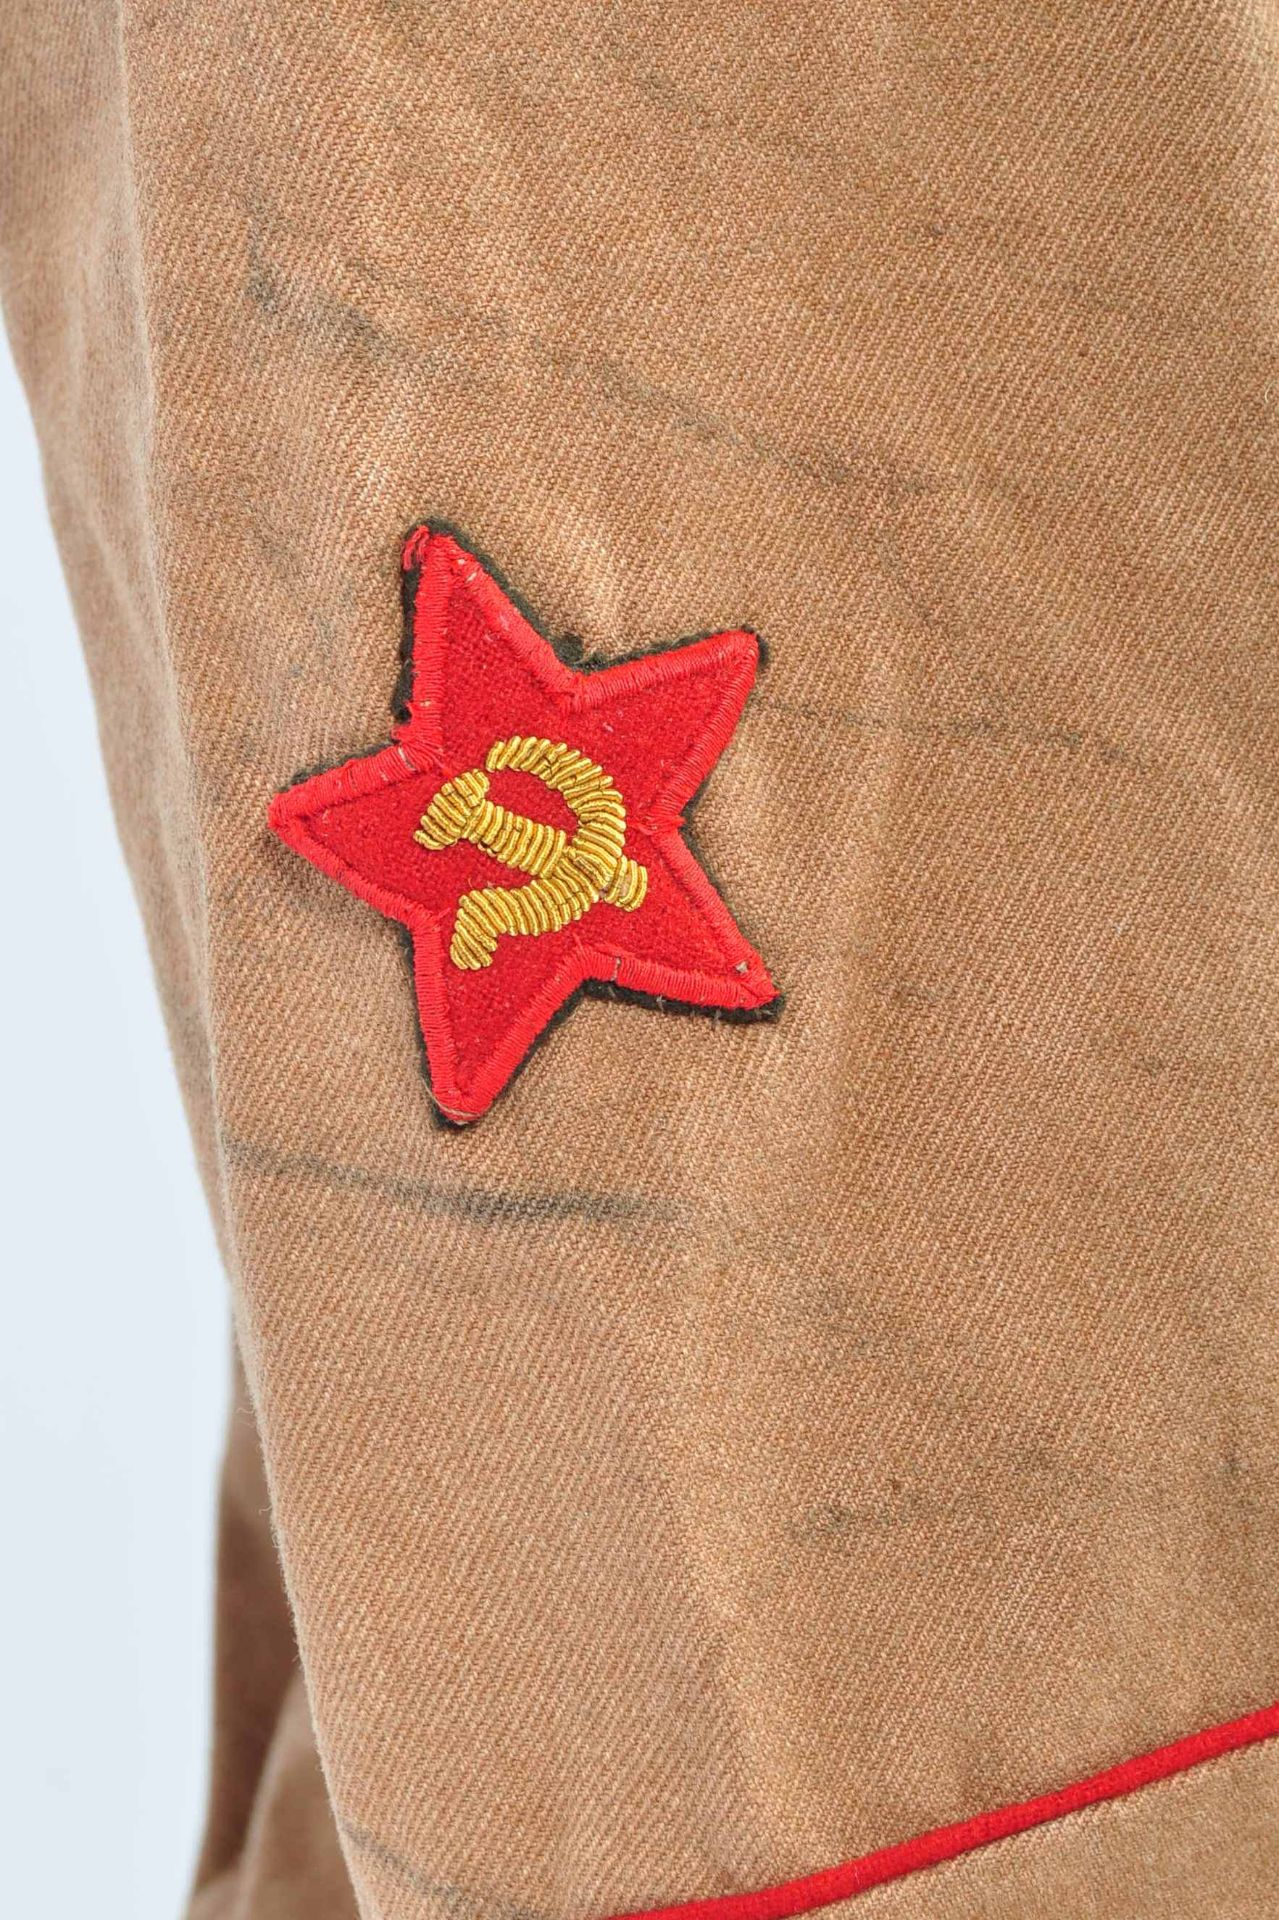 EARLY RUSSIAN SOVIET UNION RED GUARD PATTERN UNIFORM - Image 4 of 8